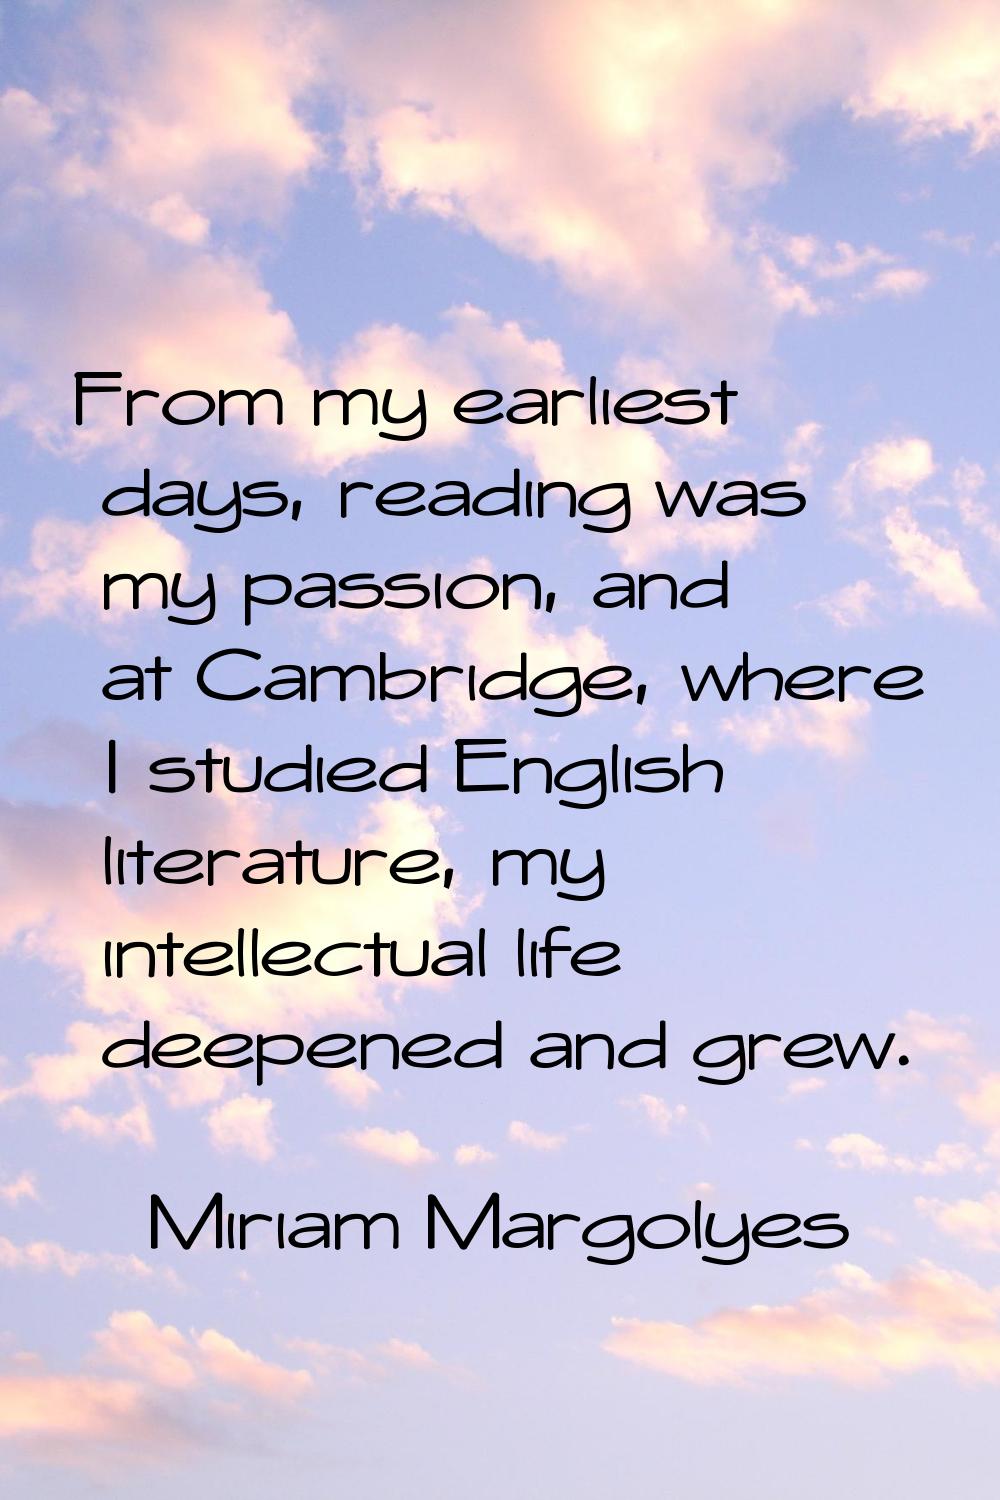 From my earliest days, reading was my passion, and at Cambridge, where I studied English literature